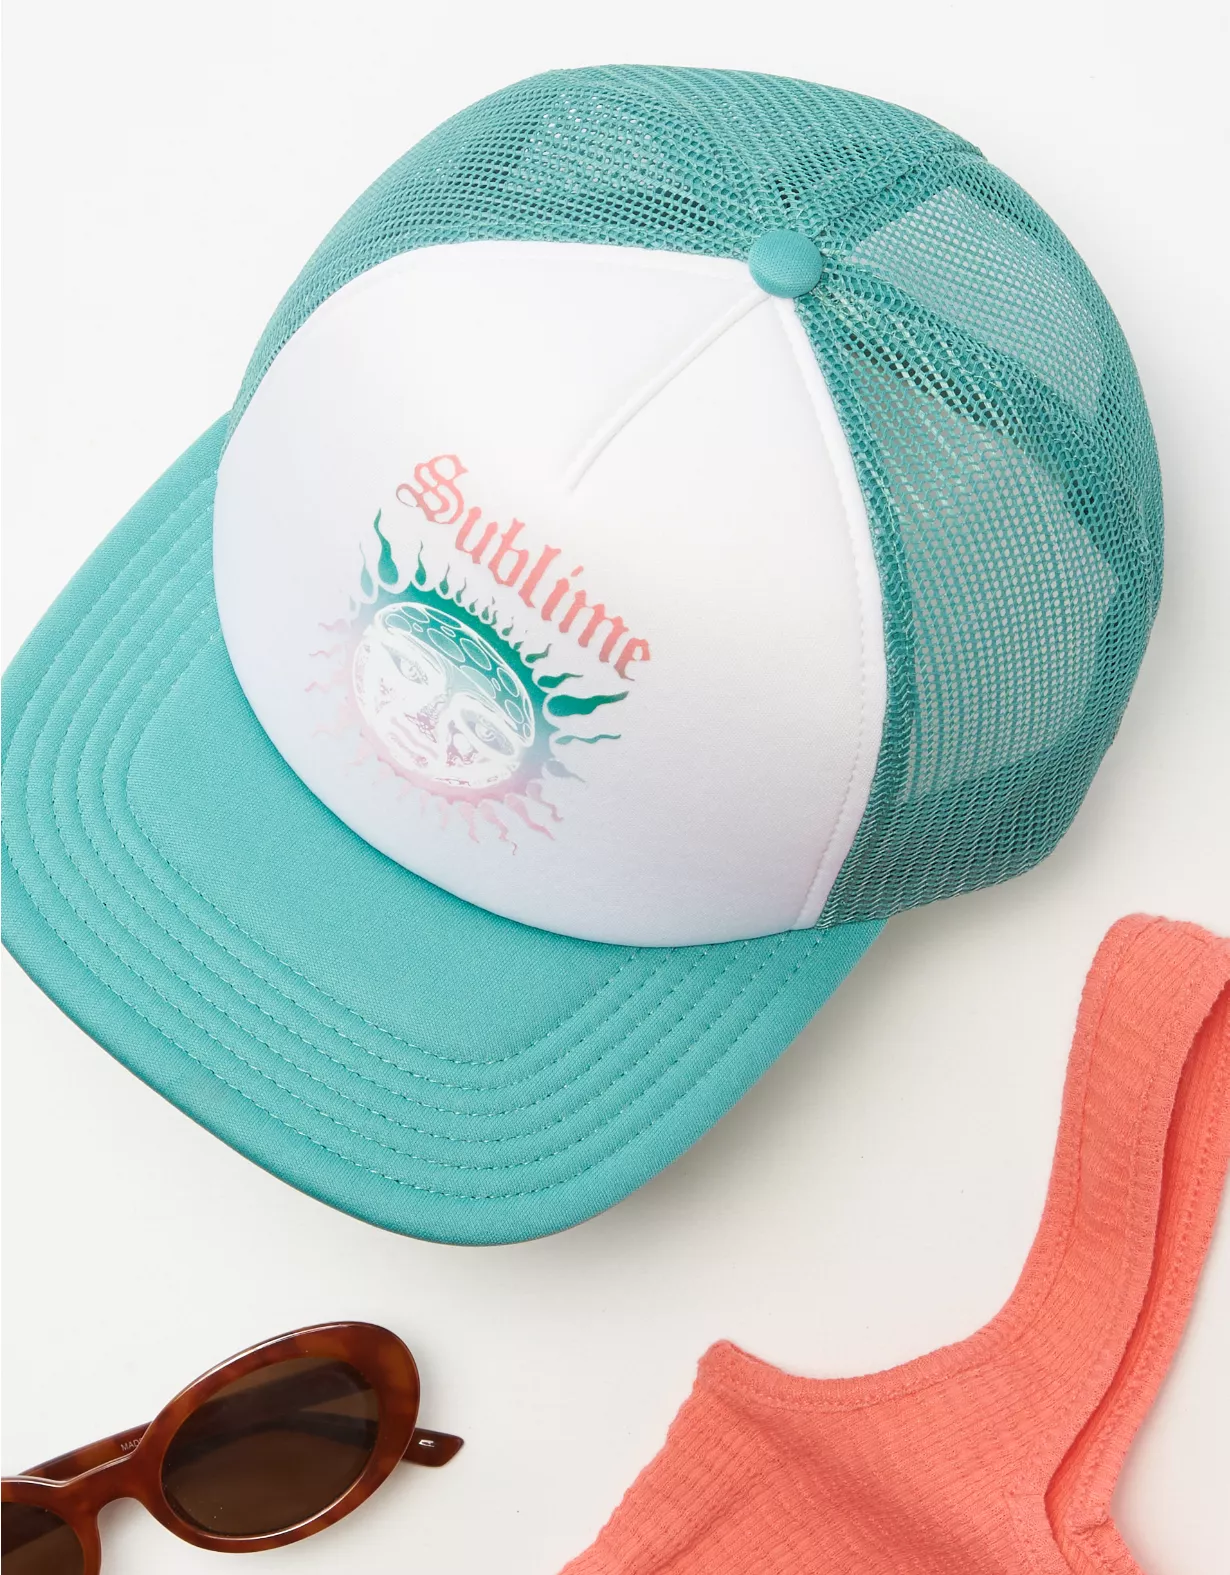 AE Sublime Trucker Hat